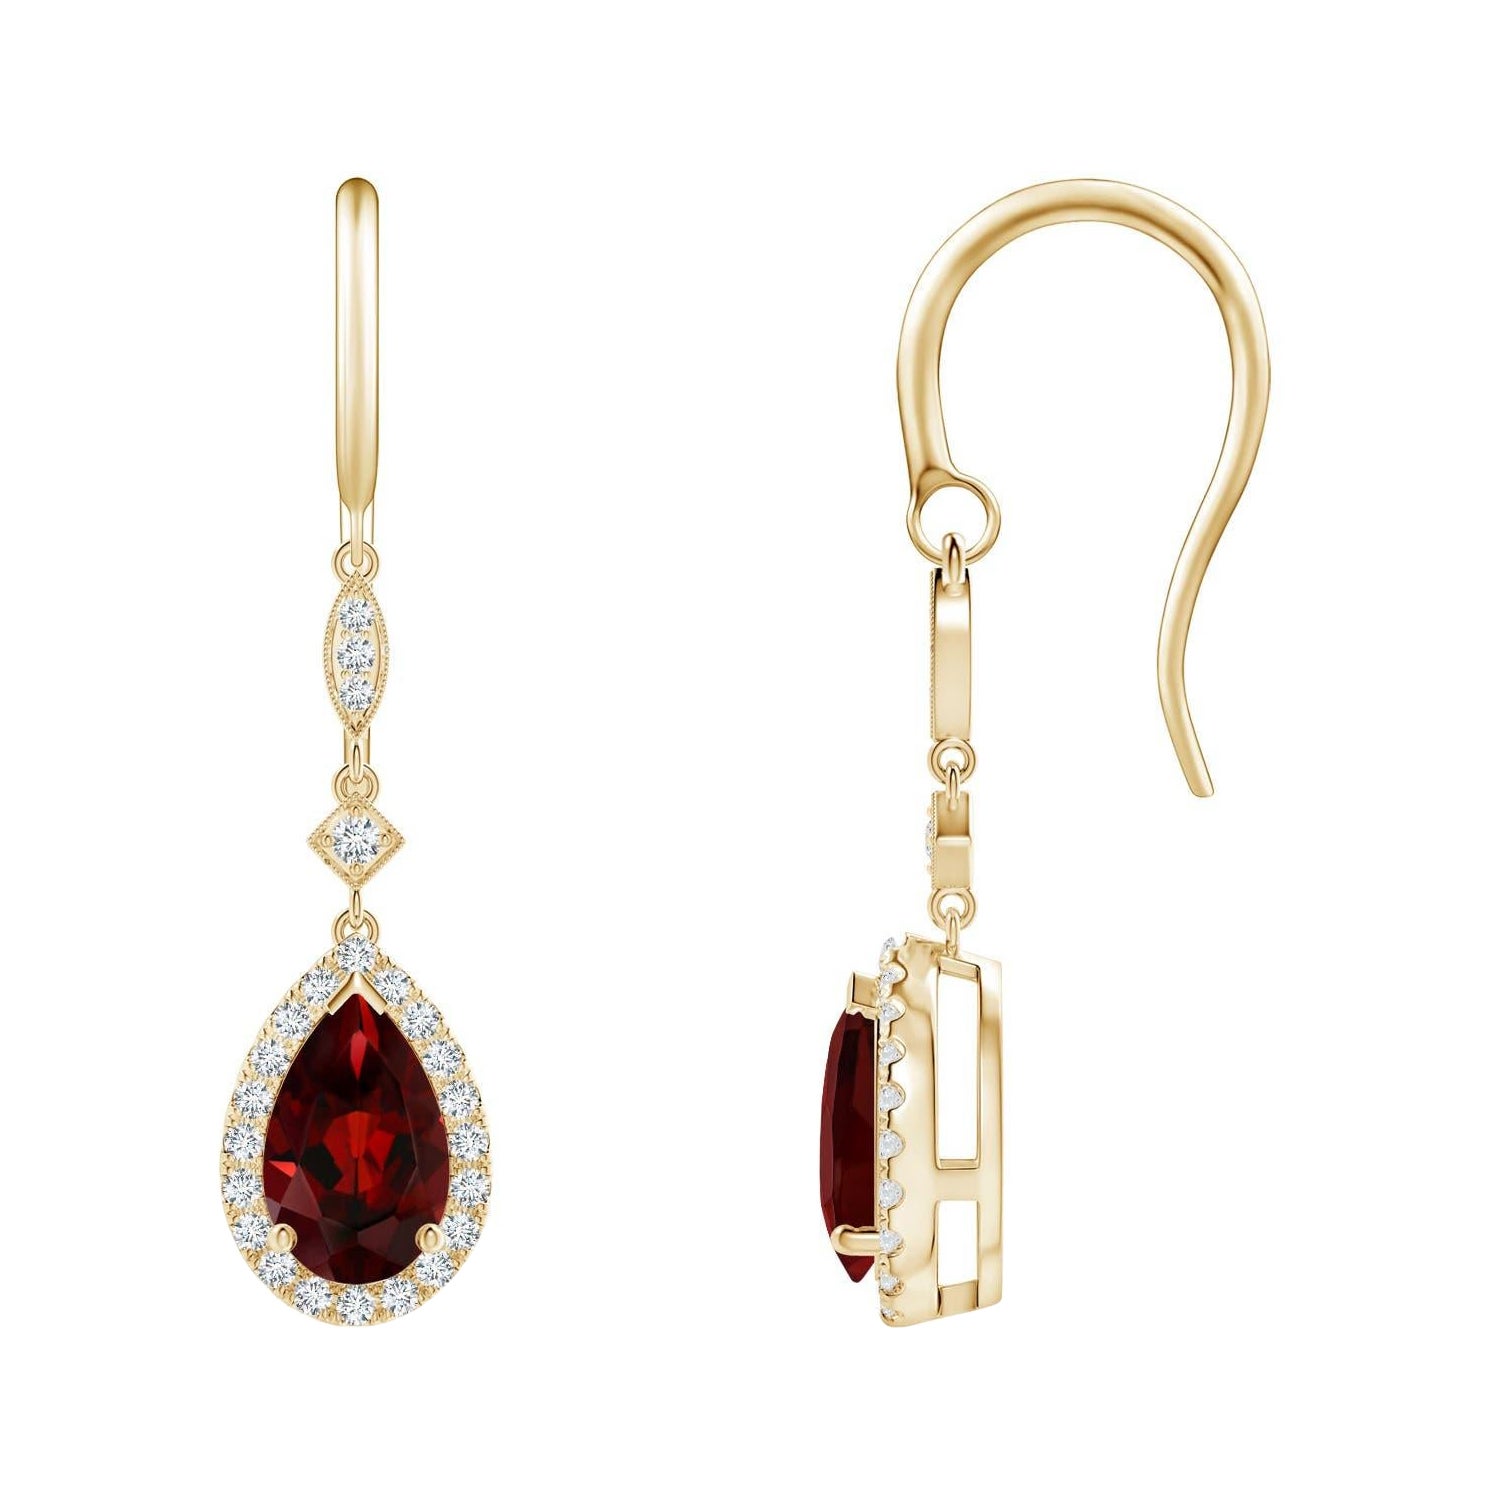 Natural Pear-Shaped 2.4ct Garnet Drop Earrings with Diamond in 14K Yellow Gold For Sale